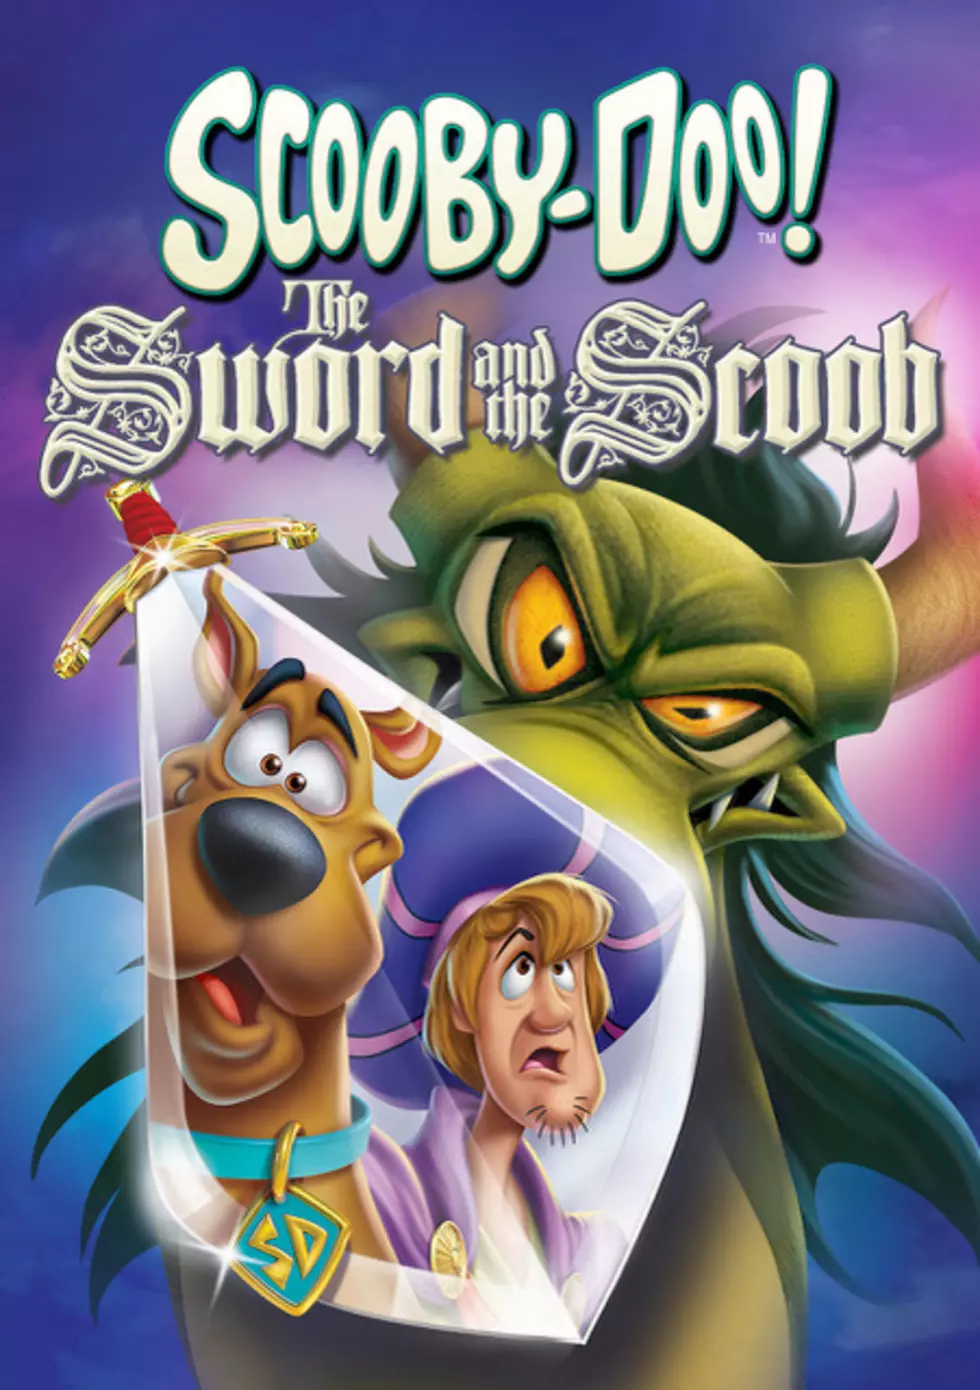 Listen for a Chance to Own, “Scooby-Doo! The Sword and Scoob”